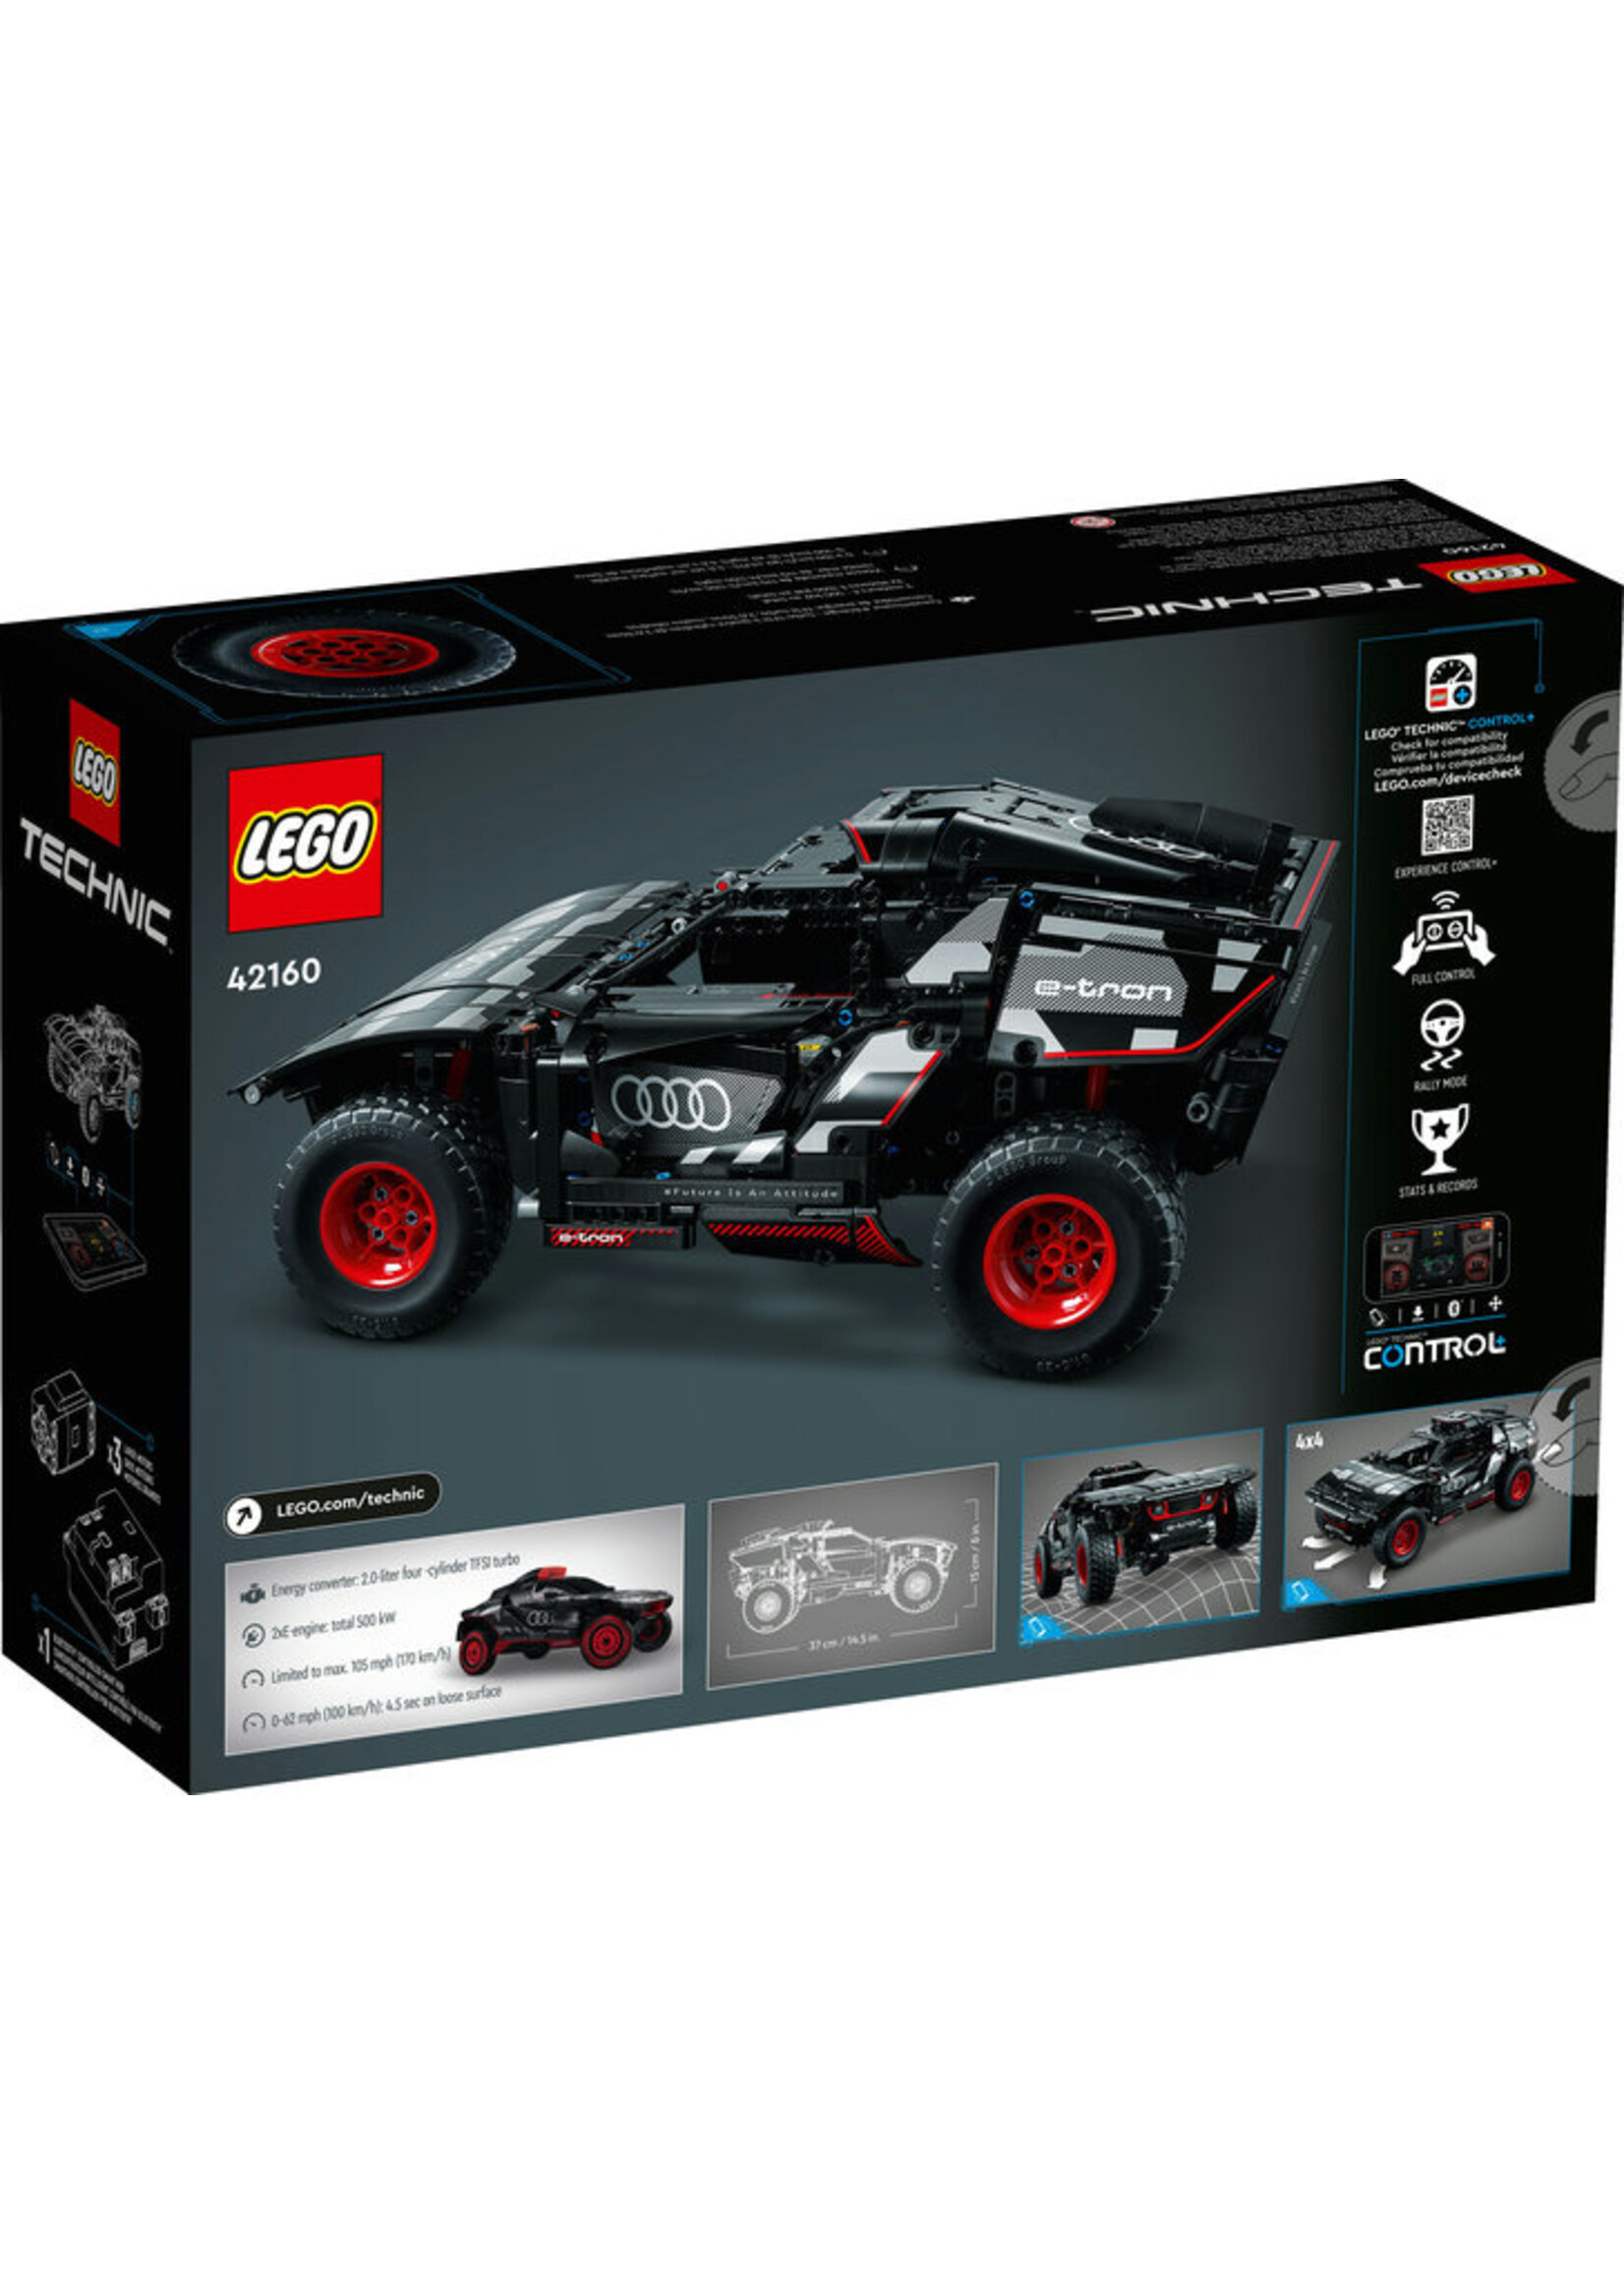 LEGO Technic Audi RS Q e-tron 42160 Advanced Building Kit for Kids Ages 10  and Up, This Remote Controlled Car Toy Features App-Controlled Steering and